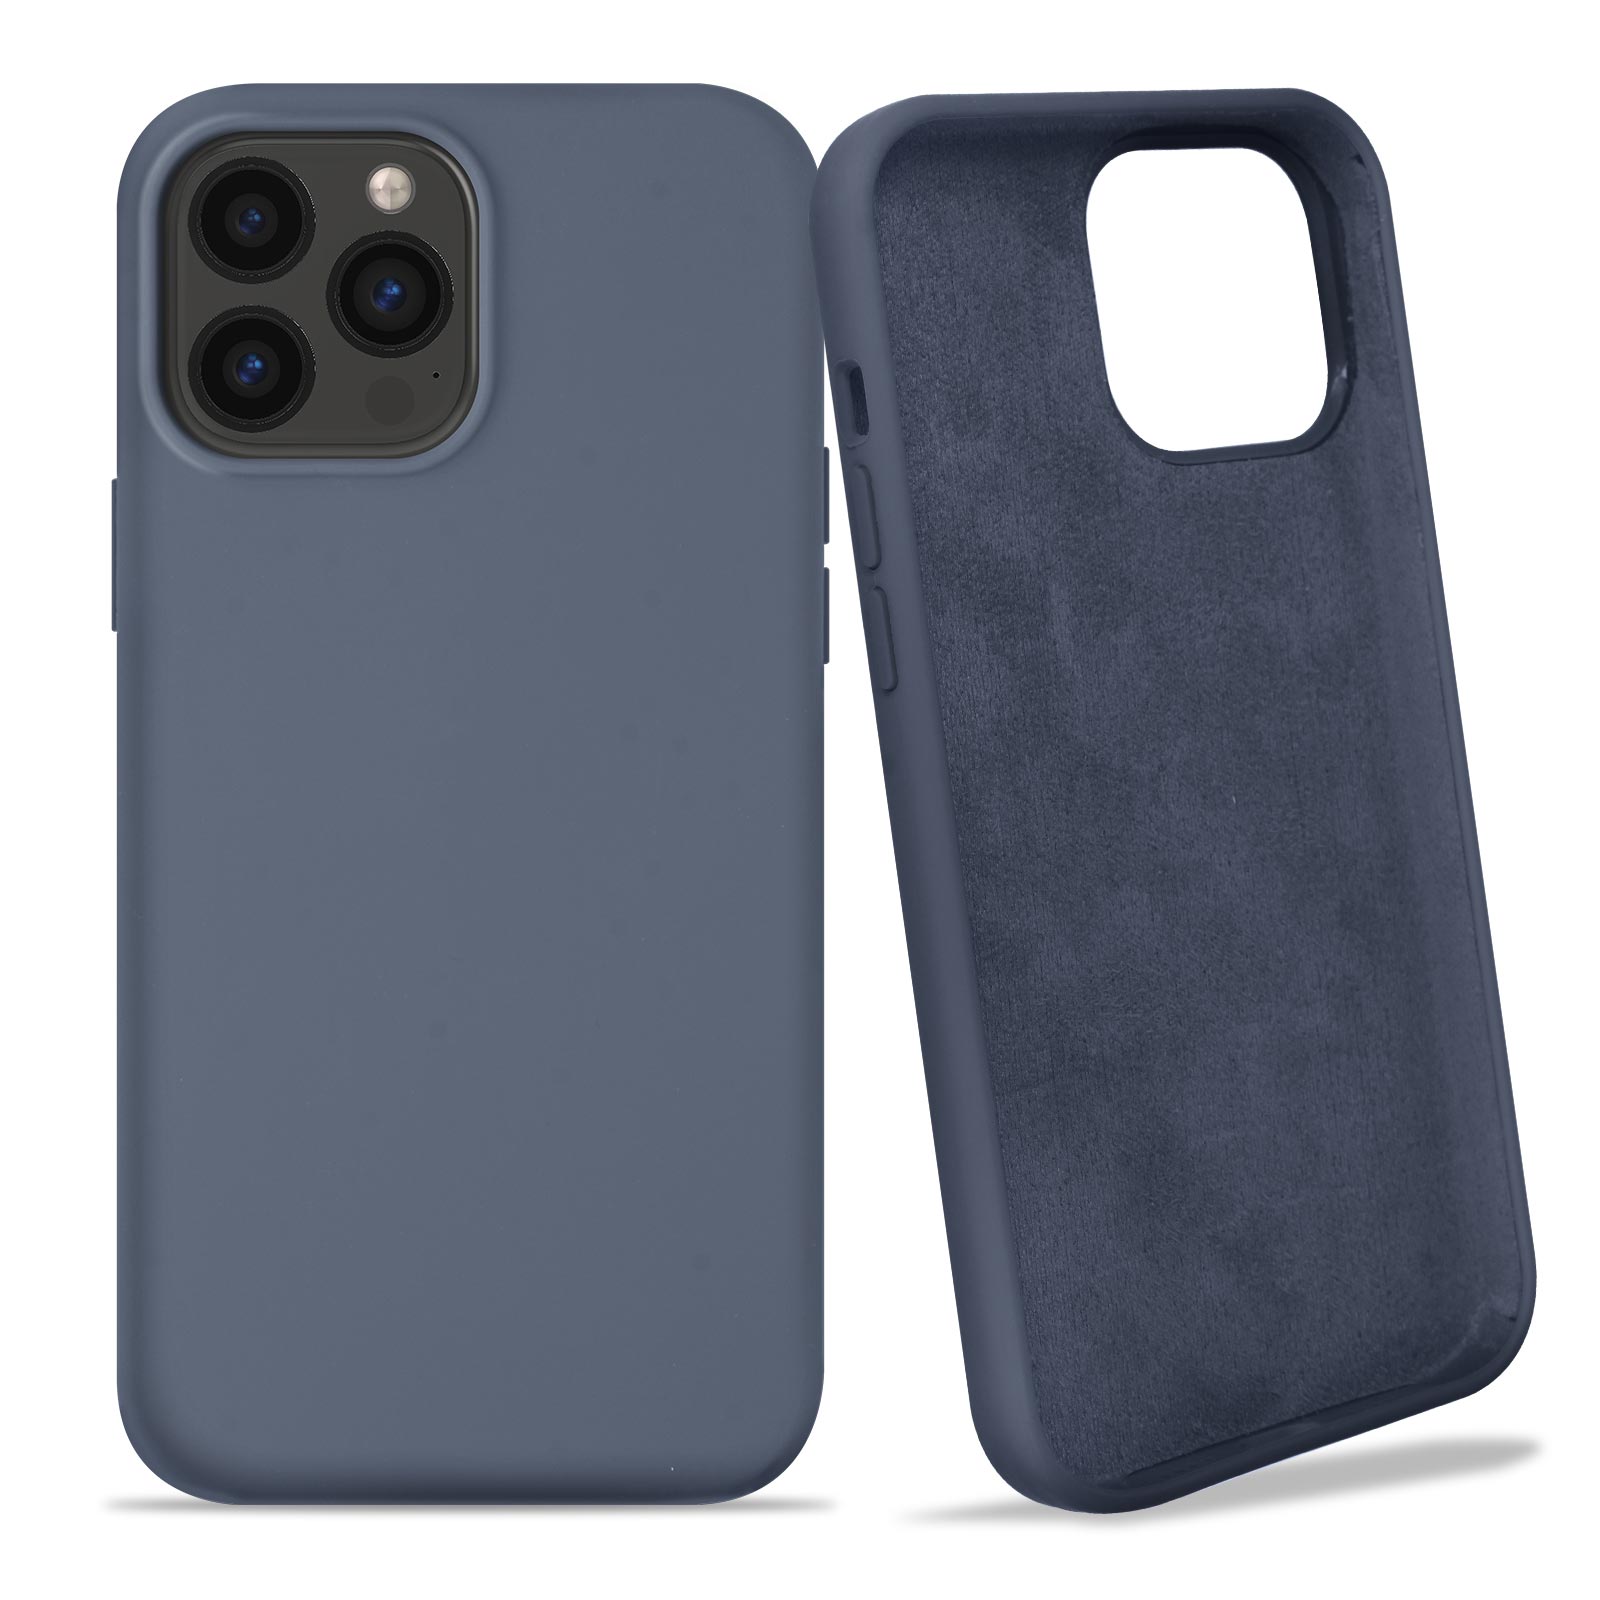 Coque iPhone 11 Pro Max - Apple silicone soft touch - Gris